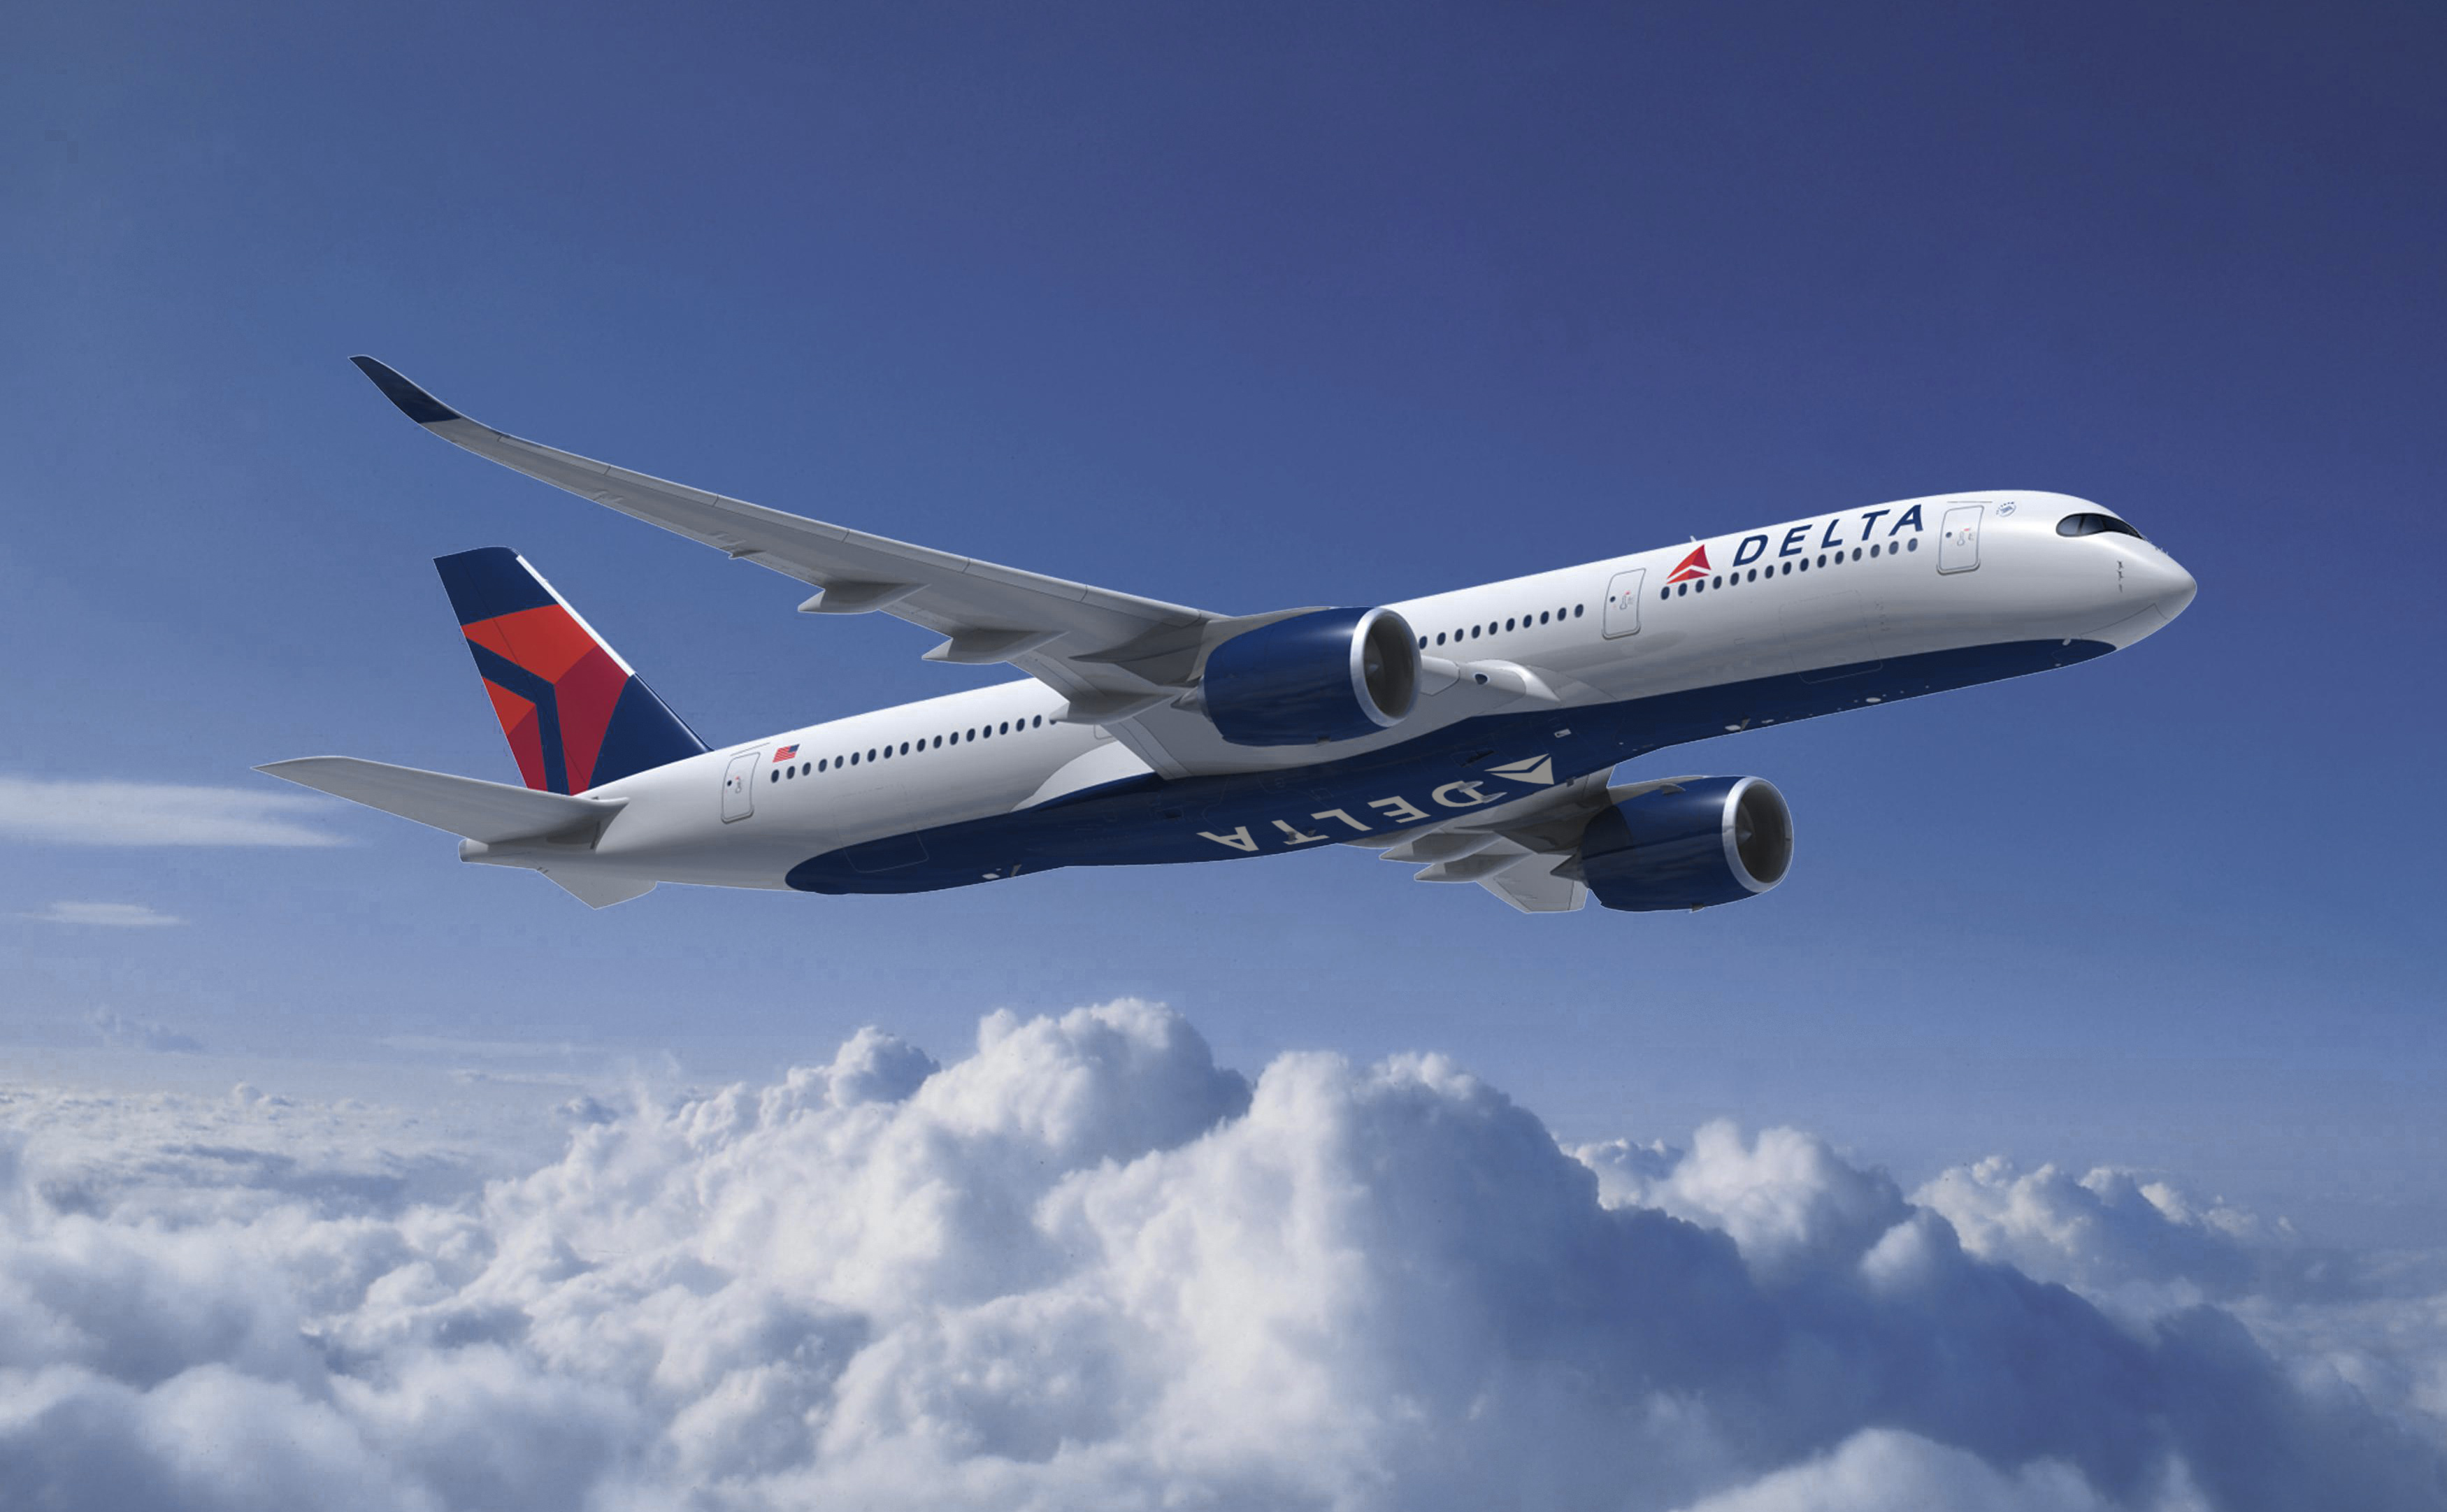 Can I use an Electronic Denied Compensation Credit for an upgrade or complimentary air with Delta Vacations?